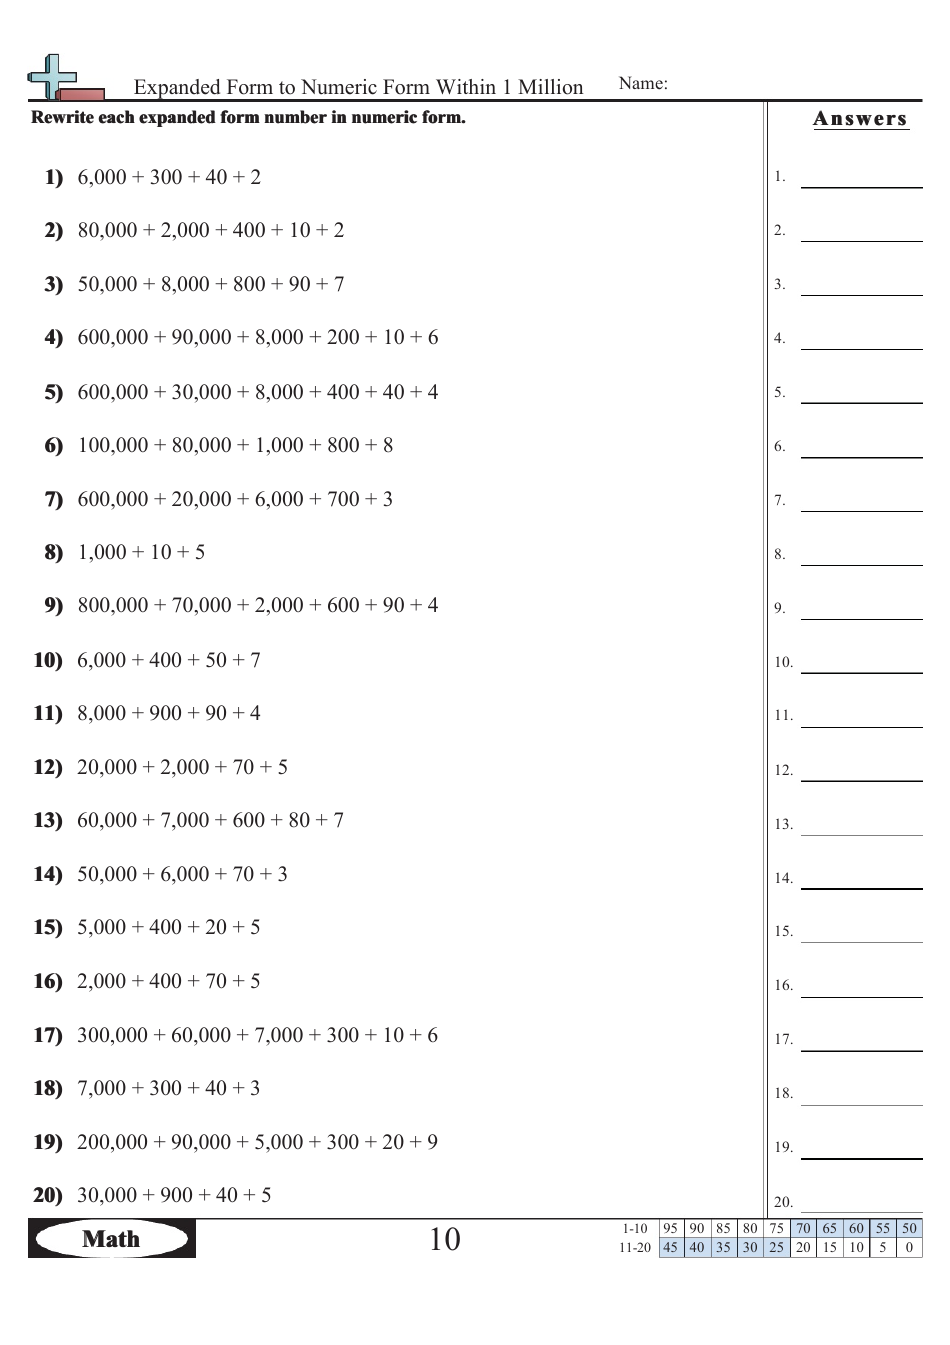 Expanded Form to Numeric Form Within 1 Million Worksheet With Answers - 6,342, Page 1